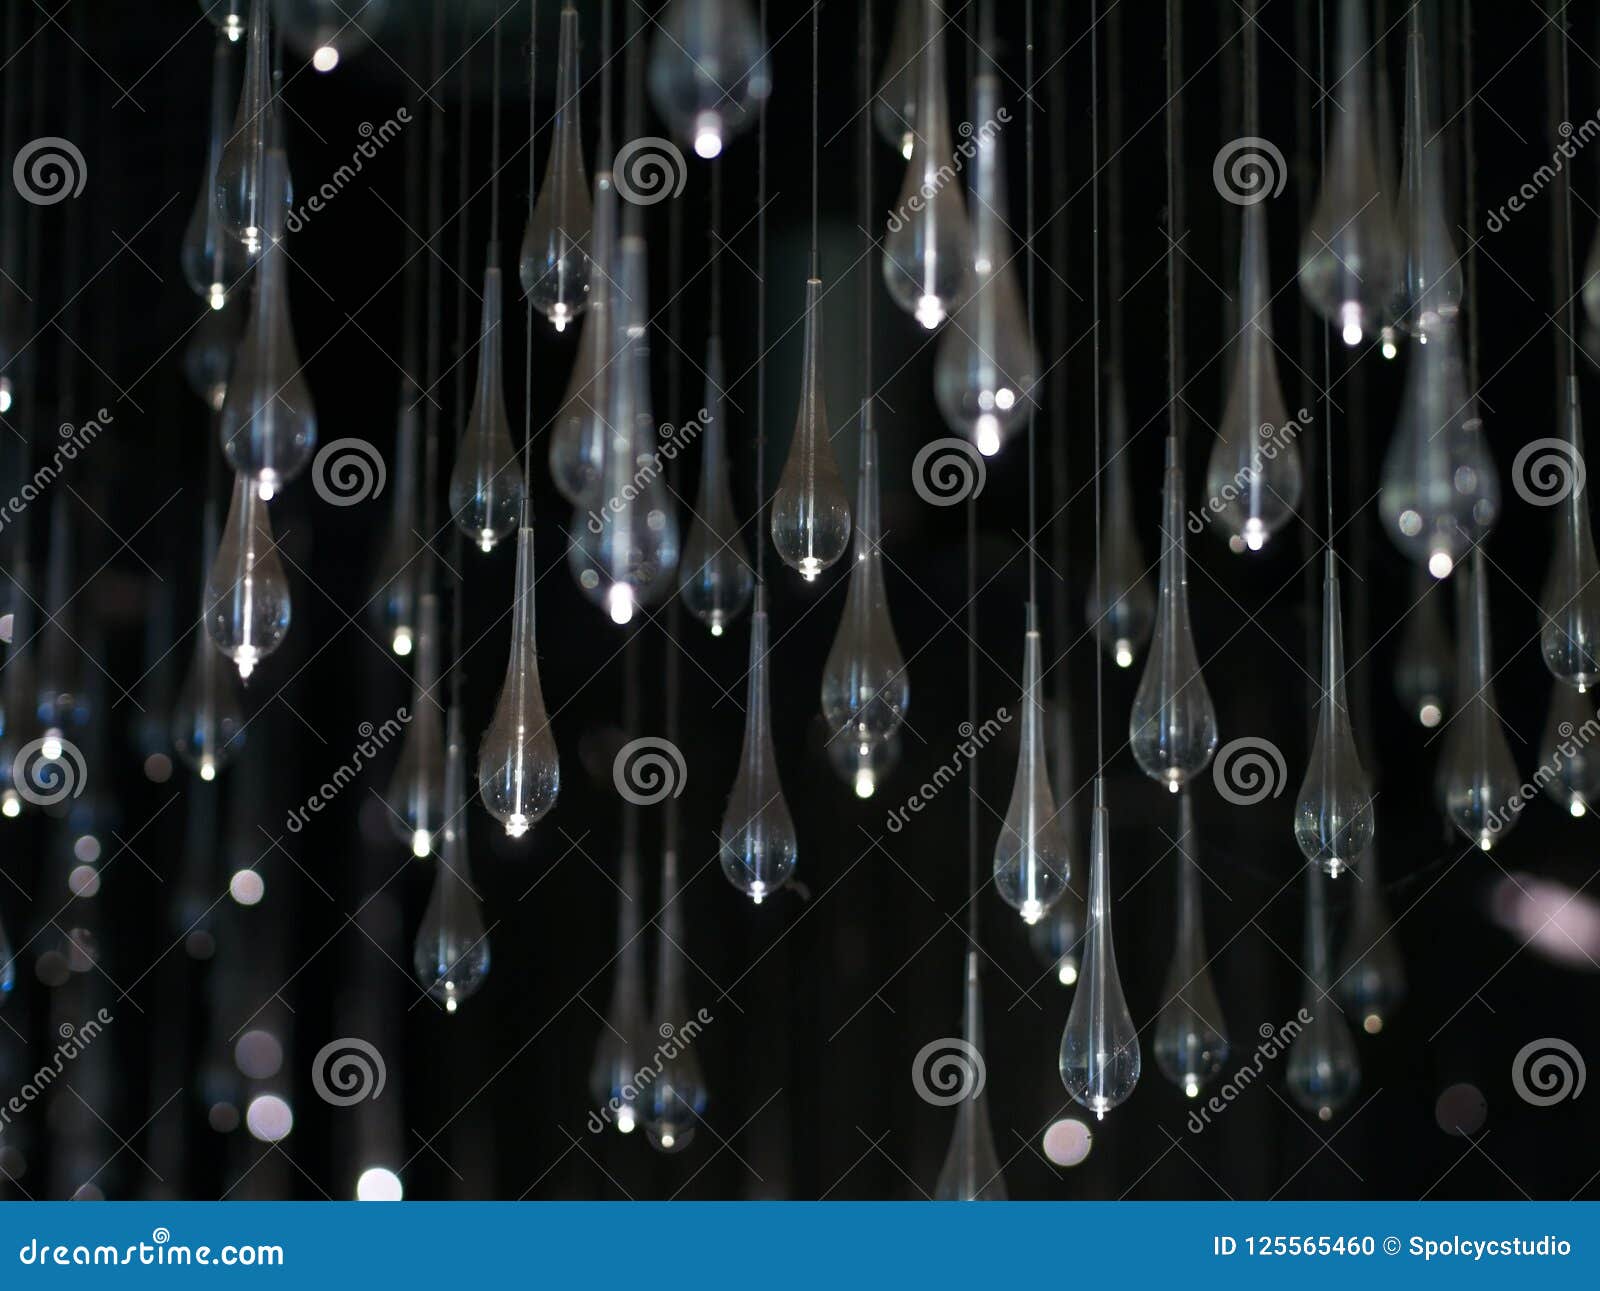 Water Rain Drop Glass Pendant Lights Hanging From The